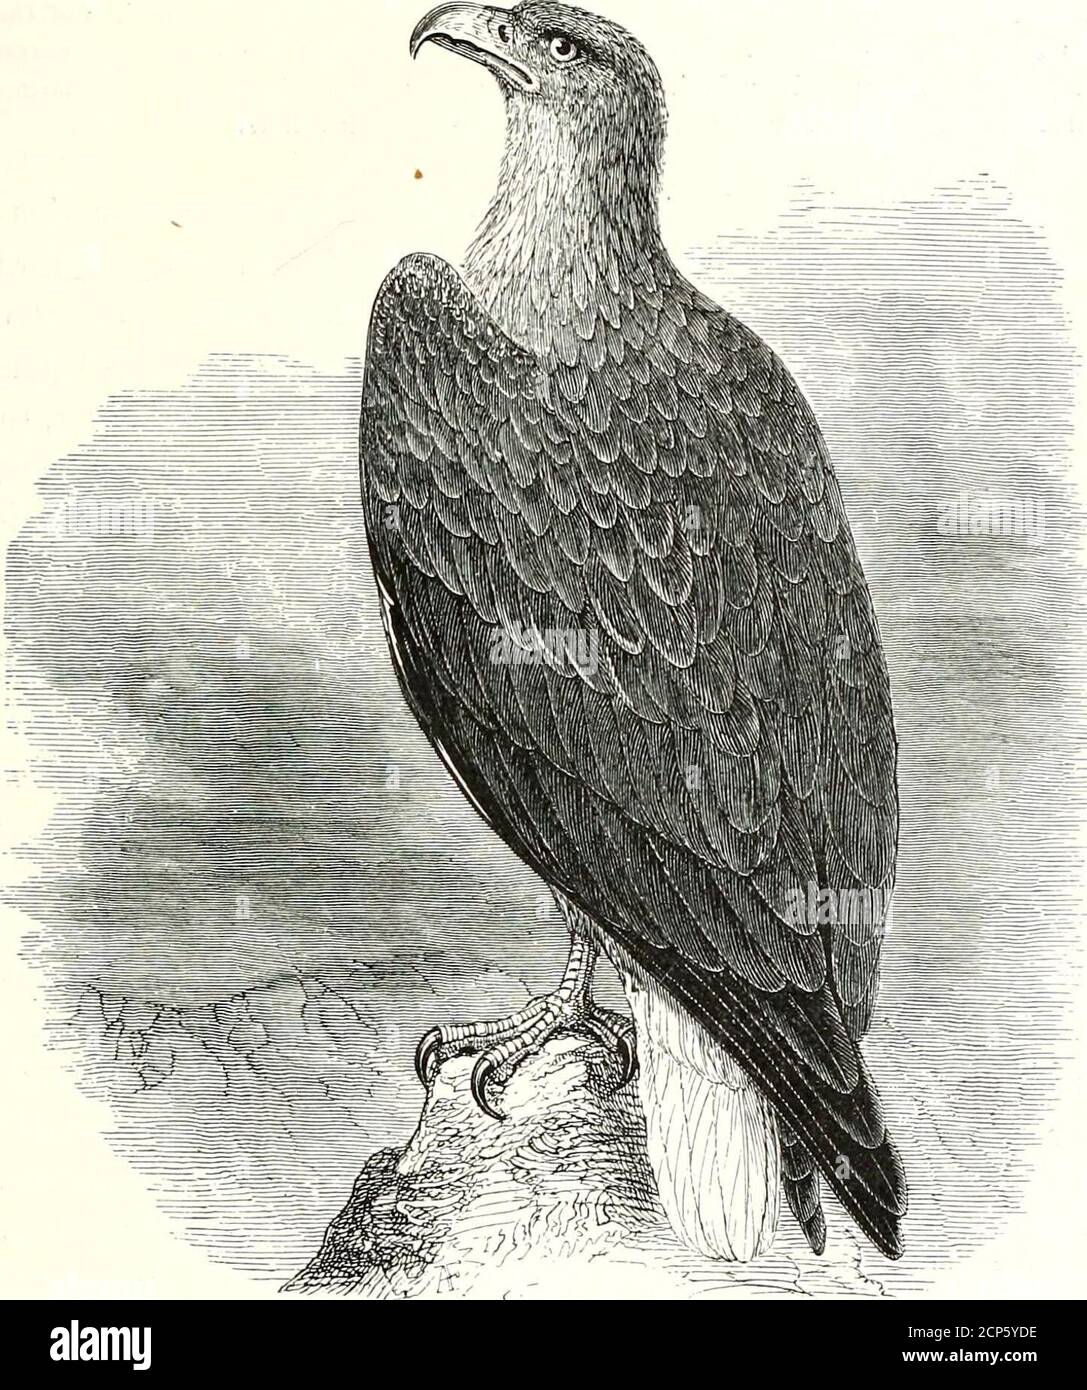 . A history of British birds . ACC1PITRES. WHITE-TAILED EAGLE. 25FALCONlDuE.. Hall^etus albicilla (Linnaeus*). THE WHITE-TAILED EAGLE. Halimetus albicilla. Hall^eetus, Savignyf.— Beak elongated, strong, straight at the base, curvingin a regular arc in advance of the cere to the tip, and forming a deep hook. The * Yultur albiulla (misprint), Linnseus, Syst. Nat. Ed. 12, i. p. 123 (1766).f Systeme des Oiseaux de lEgypte et de la Syne, p. 8 (1810).VOL. I. E 2G fal&lt; hxiiu:. upper ridge broad and rather flattened. Edges of the maxilla slightly pro-minent behind the commencement of the hook. Nost Stock Photo